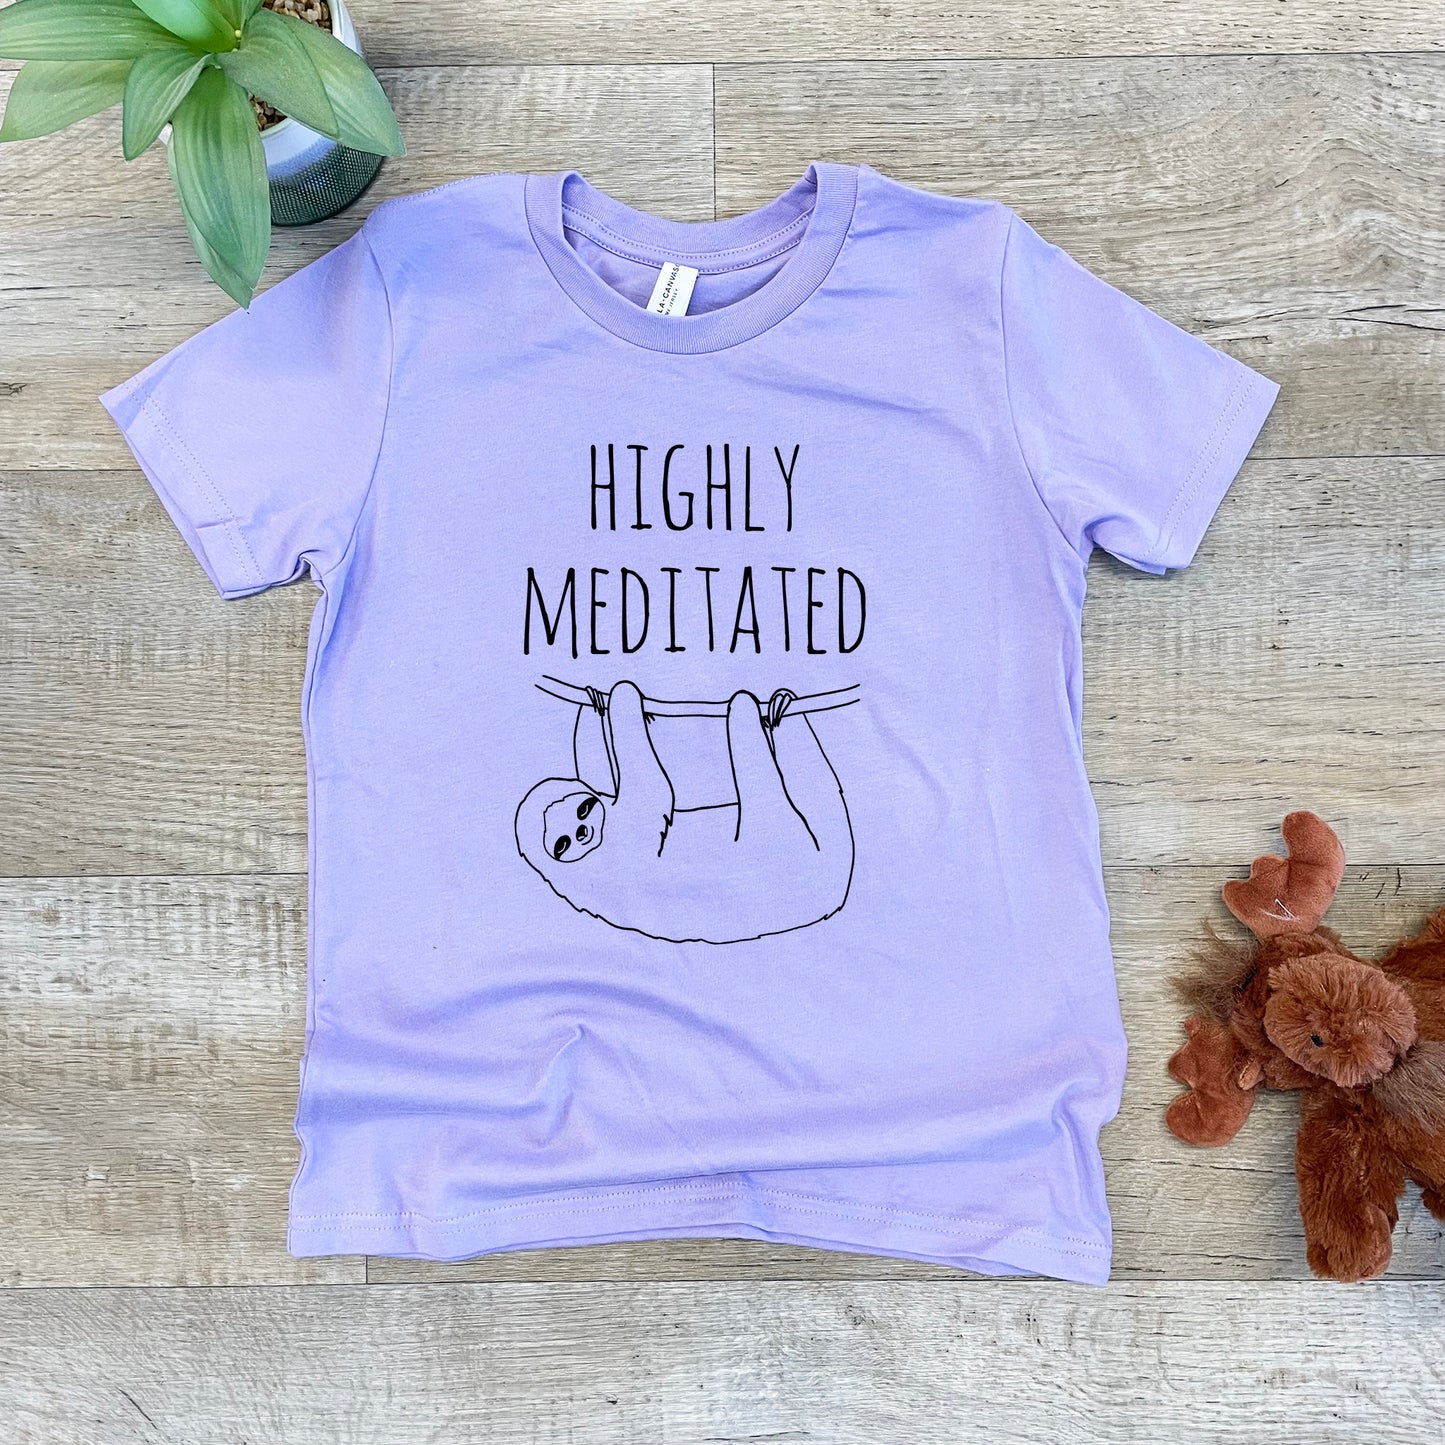 Highly Meditated (Sloth) - Kid's Tee - Columbia Blue or Lavender